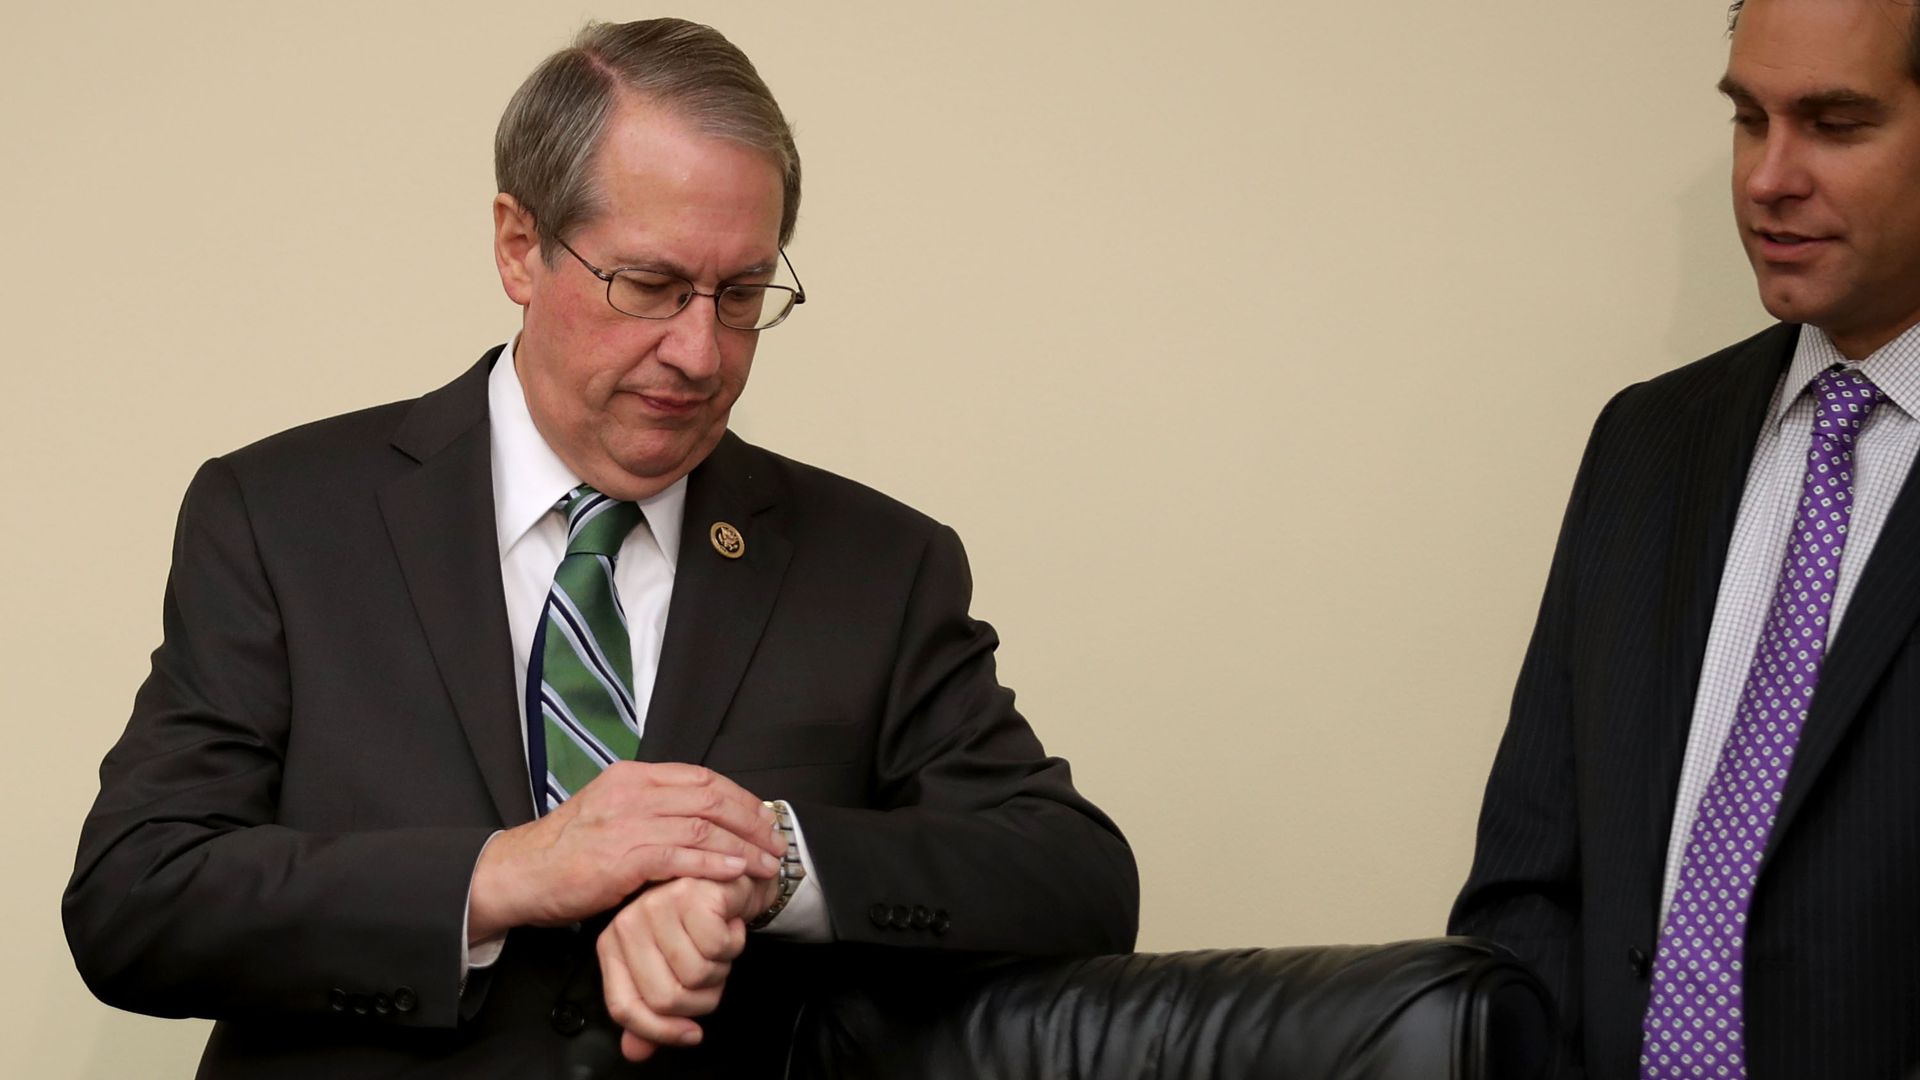 Bob Goodlatte checks his watching wearing a suit and tie